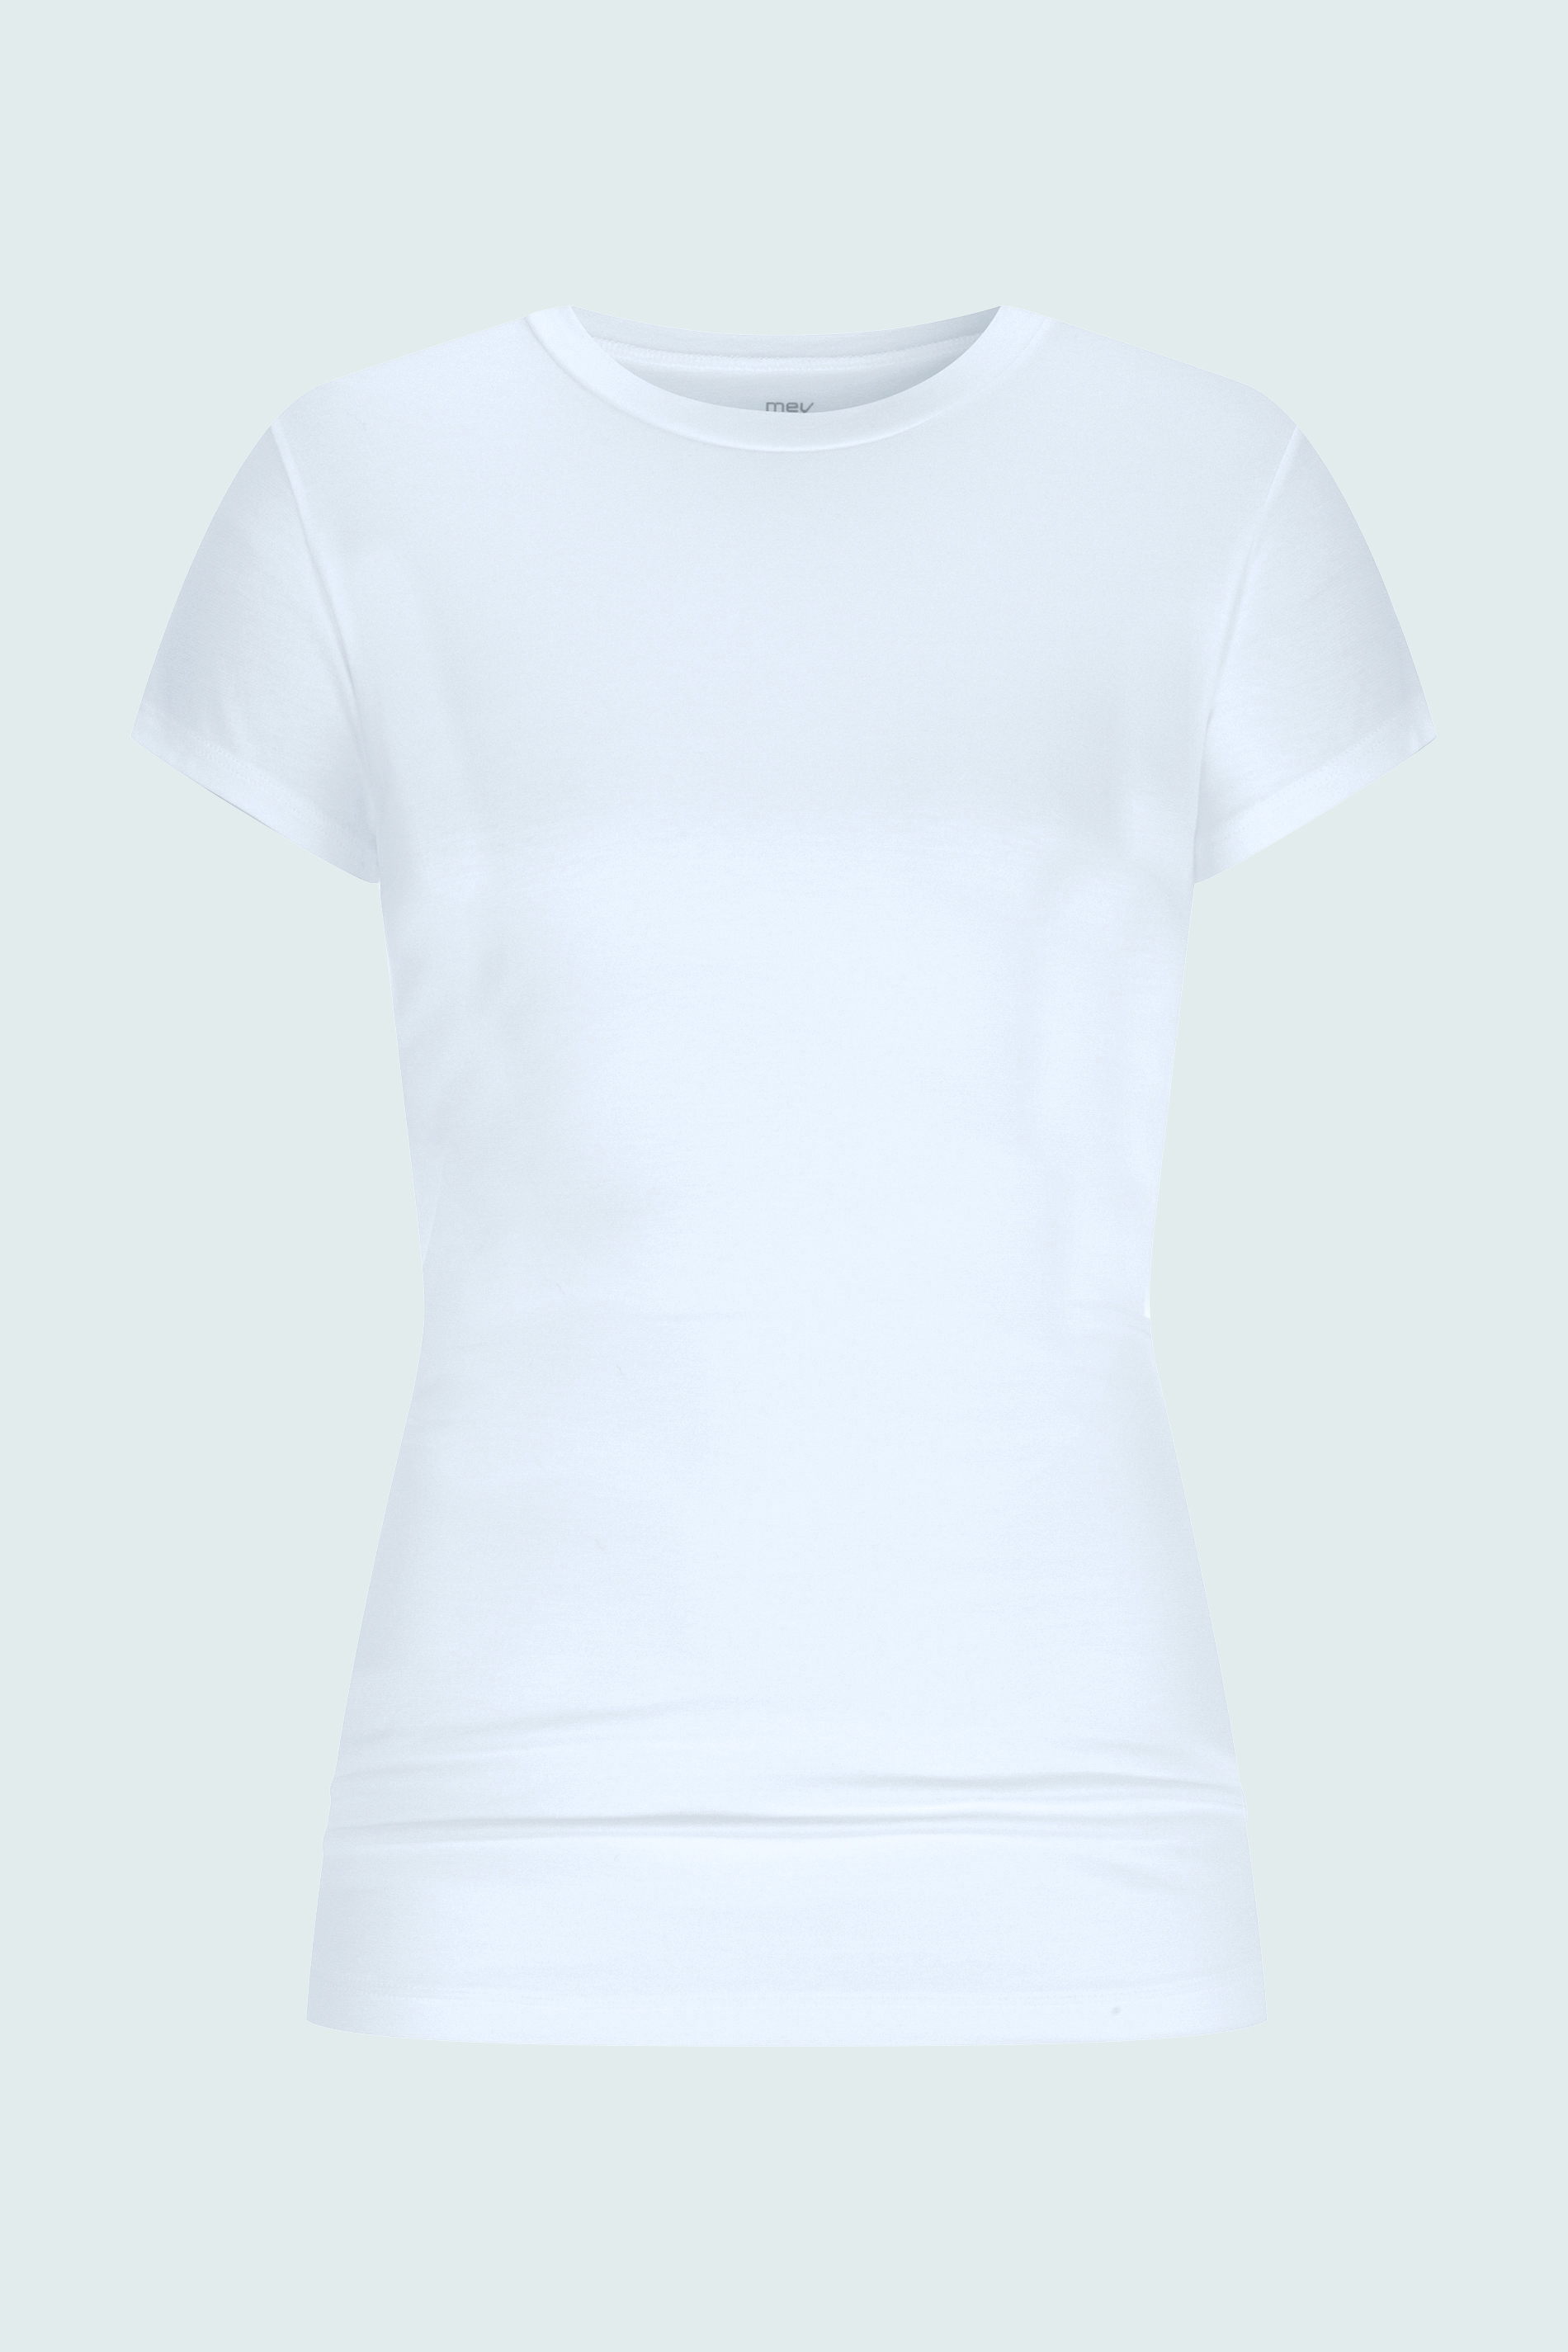 T-Shirt Wit Serie Cotton Pure Uitknippen | mey®